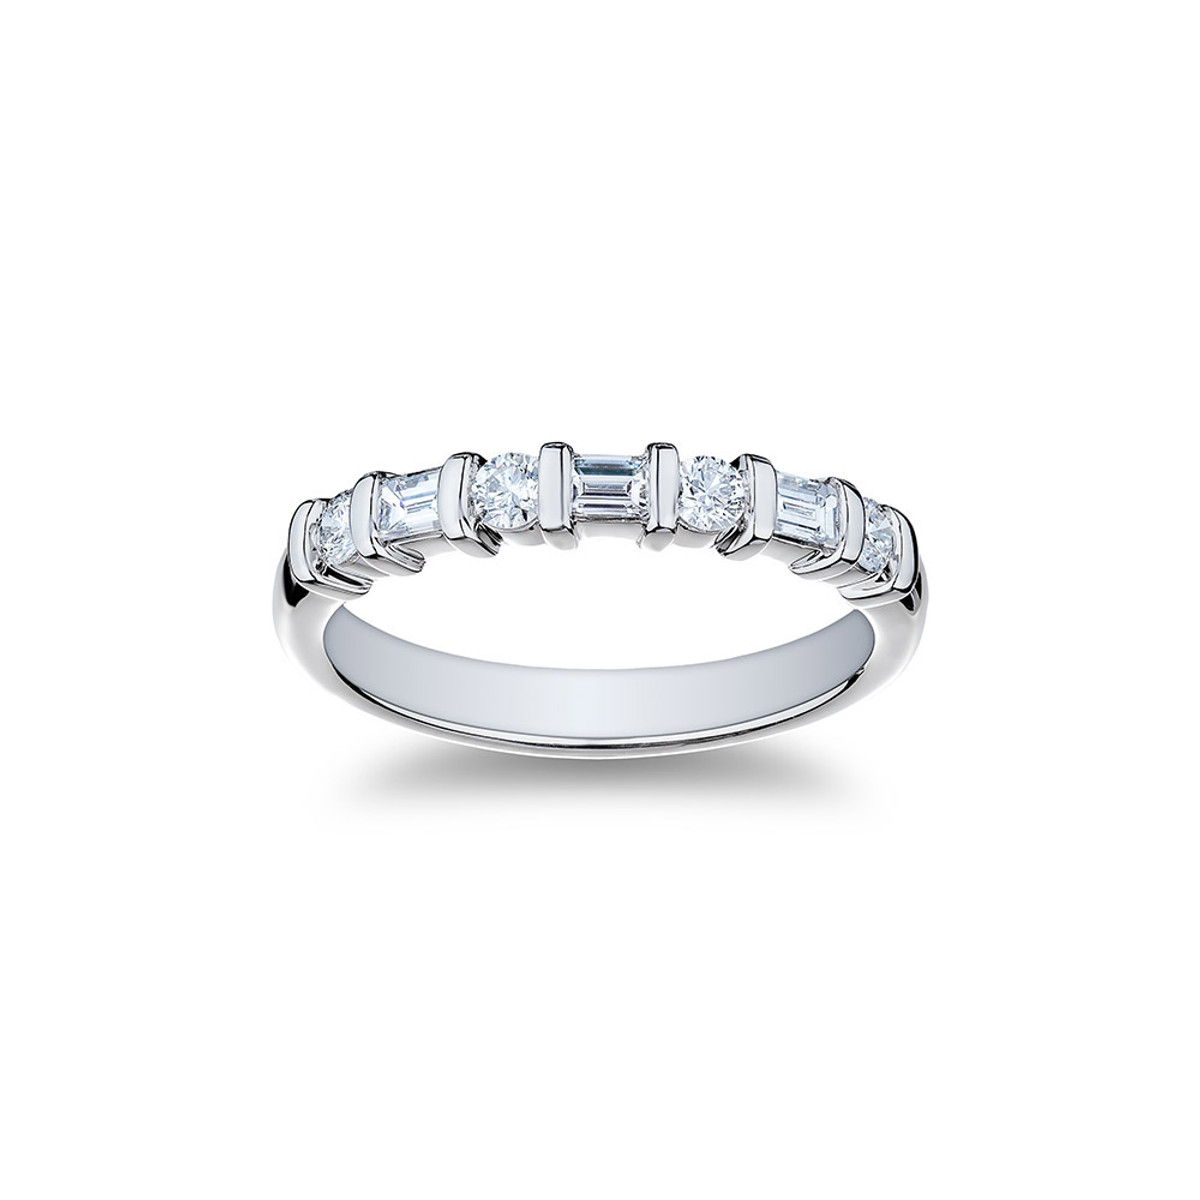 Hyde Park Collection Platinum Diamond Band-43570 Product Image